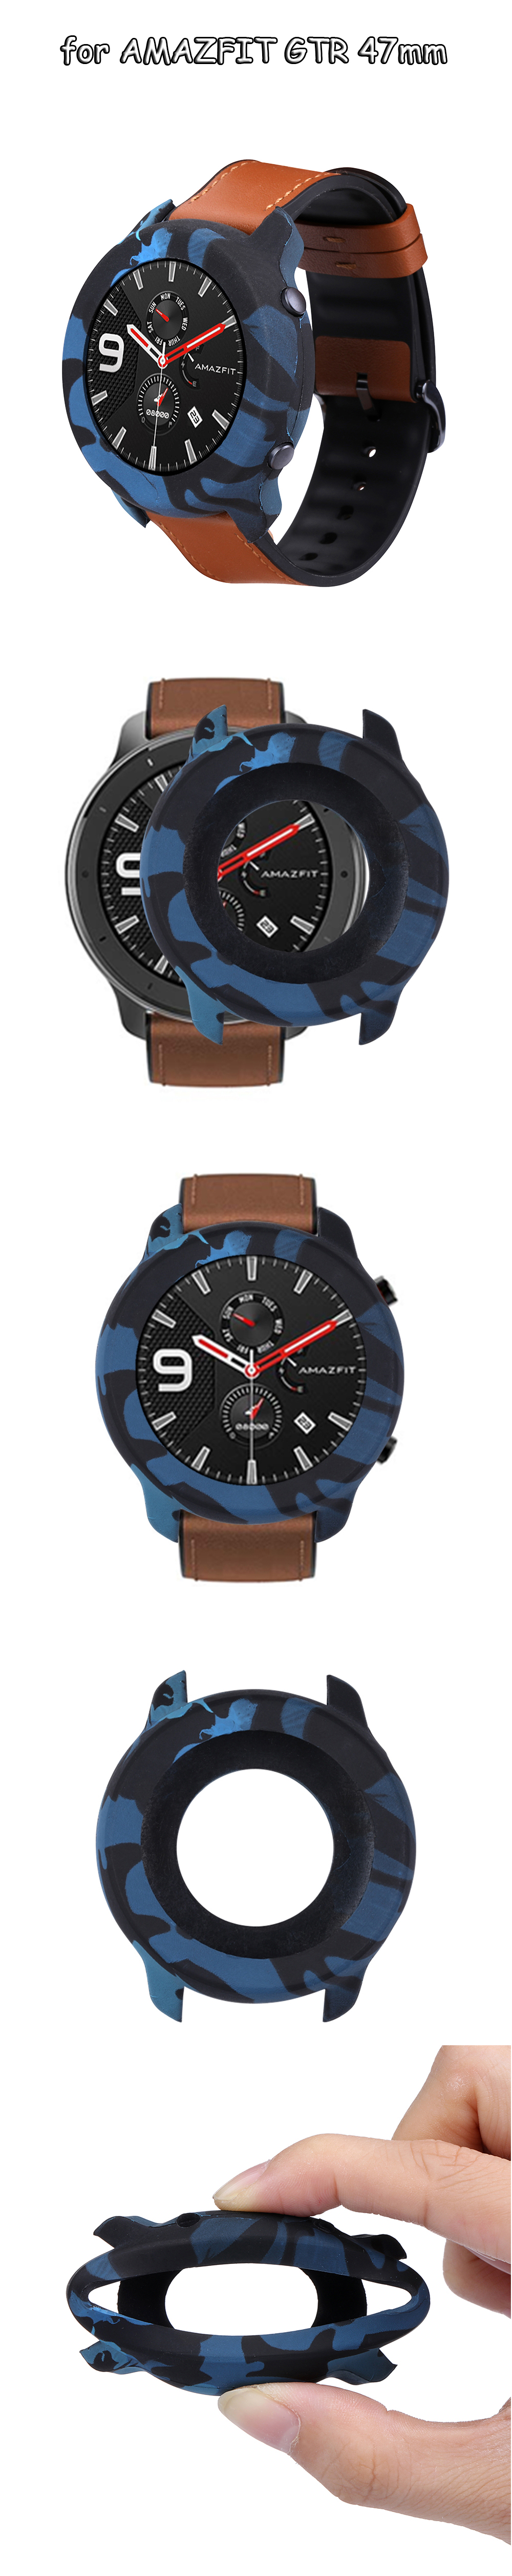 Bakeey-Camouflage-Soft-Silicone-Watch-Case-Cover-Watch-Cover-Screen-Protector-for-AMAZFIT-GTR-47mm-1614263-1